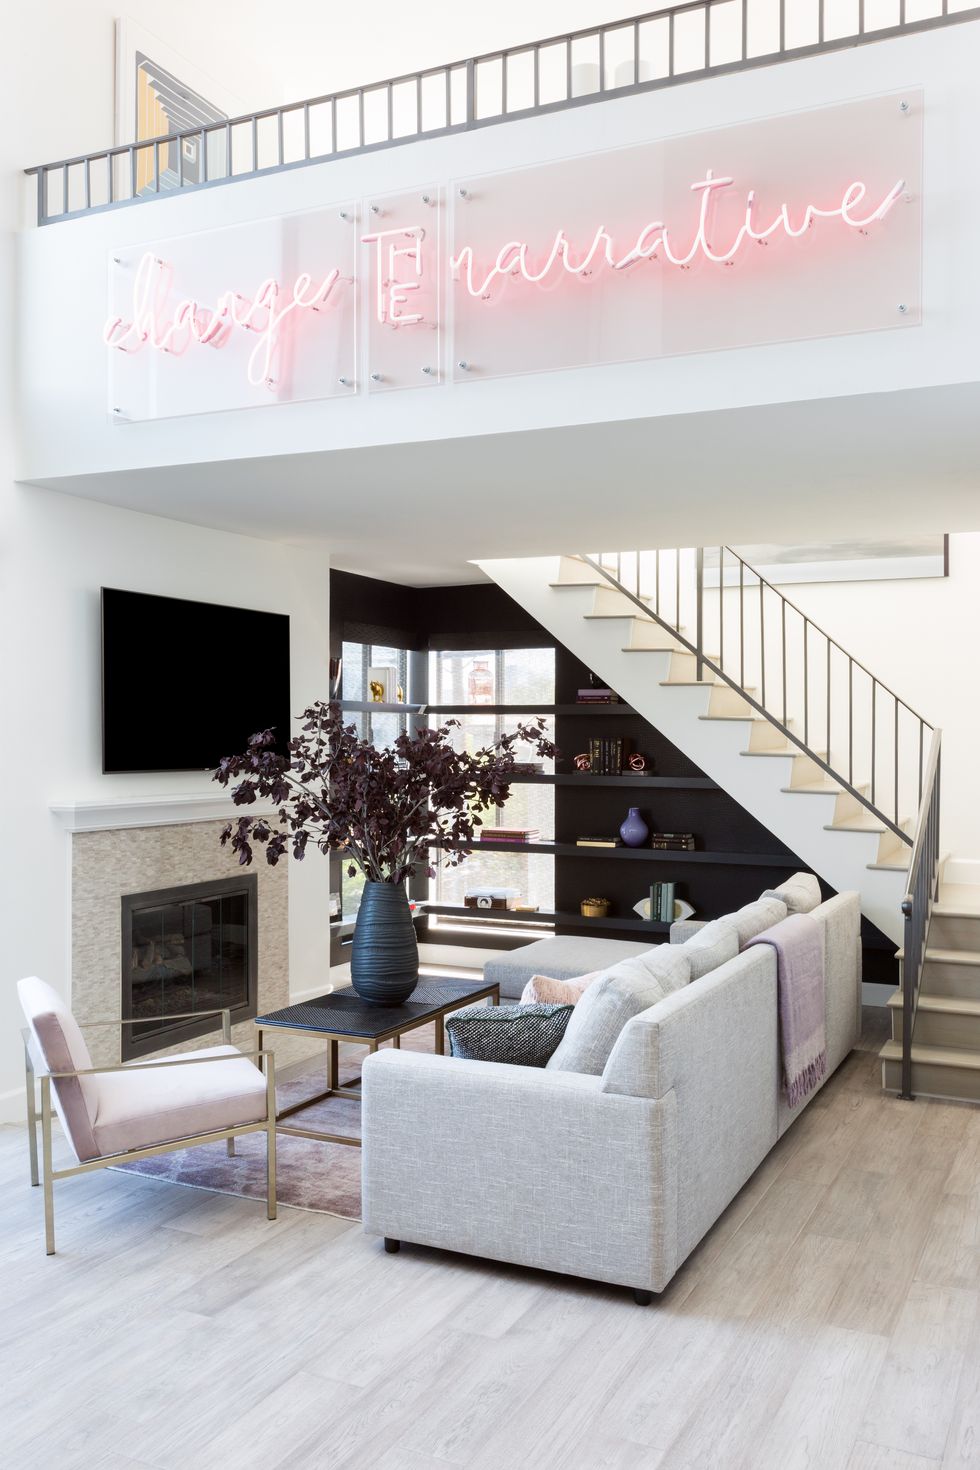 Do you need a neon sign in your home? The new @housebeautiful article may  sway you to go for it! At Alice Lane Interior Design, the…